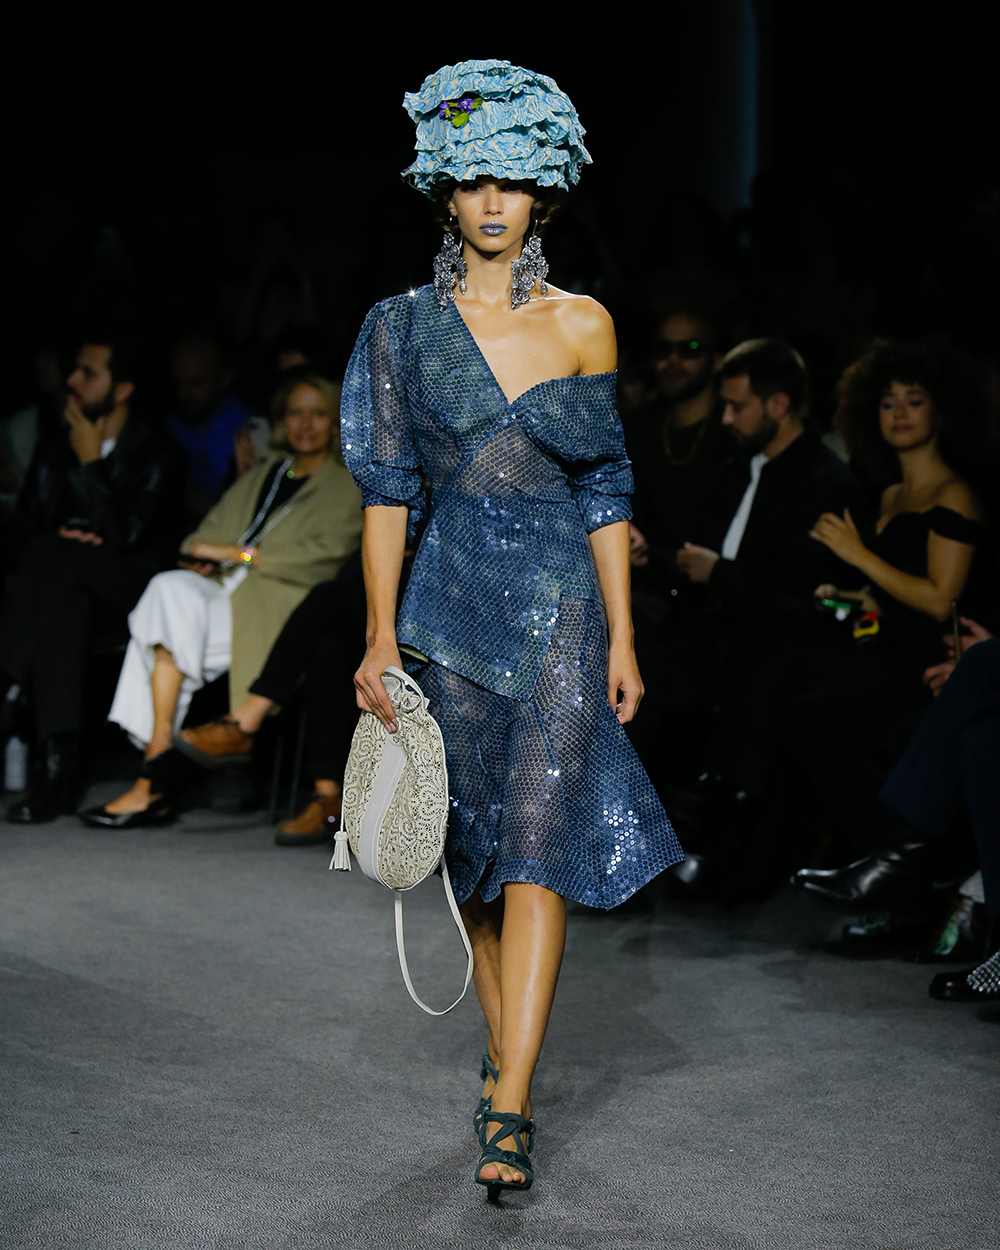 The SS24 by Andreas Kronthaler and Vivienne Westwood